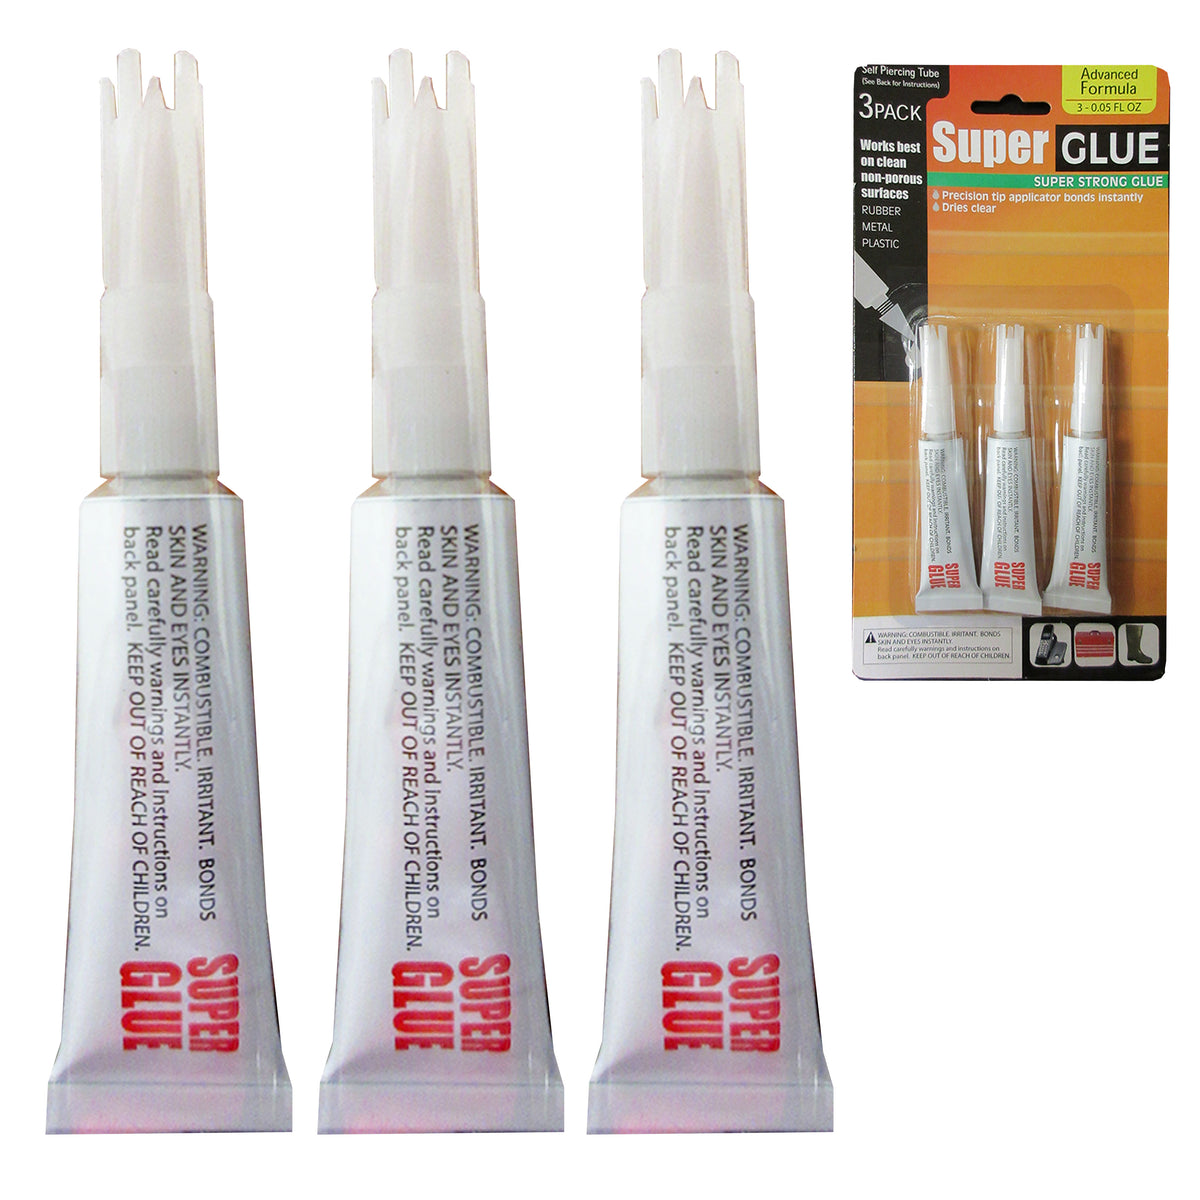 Metal Glue - 30g Metal Adhesive for Metal for Bonding Between Metal and Metal,Metal and Other material. Instant Super Glue for Metal, Glass, Plastic